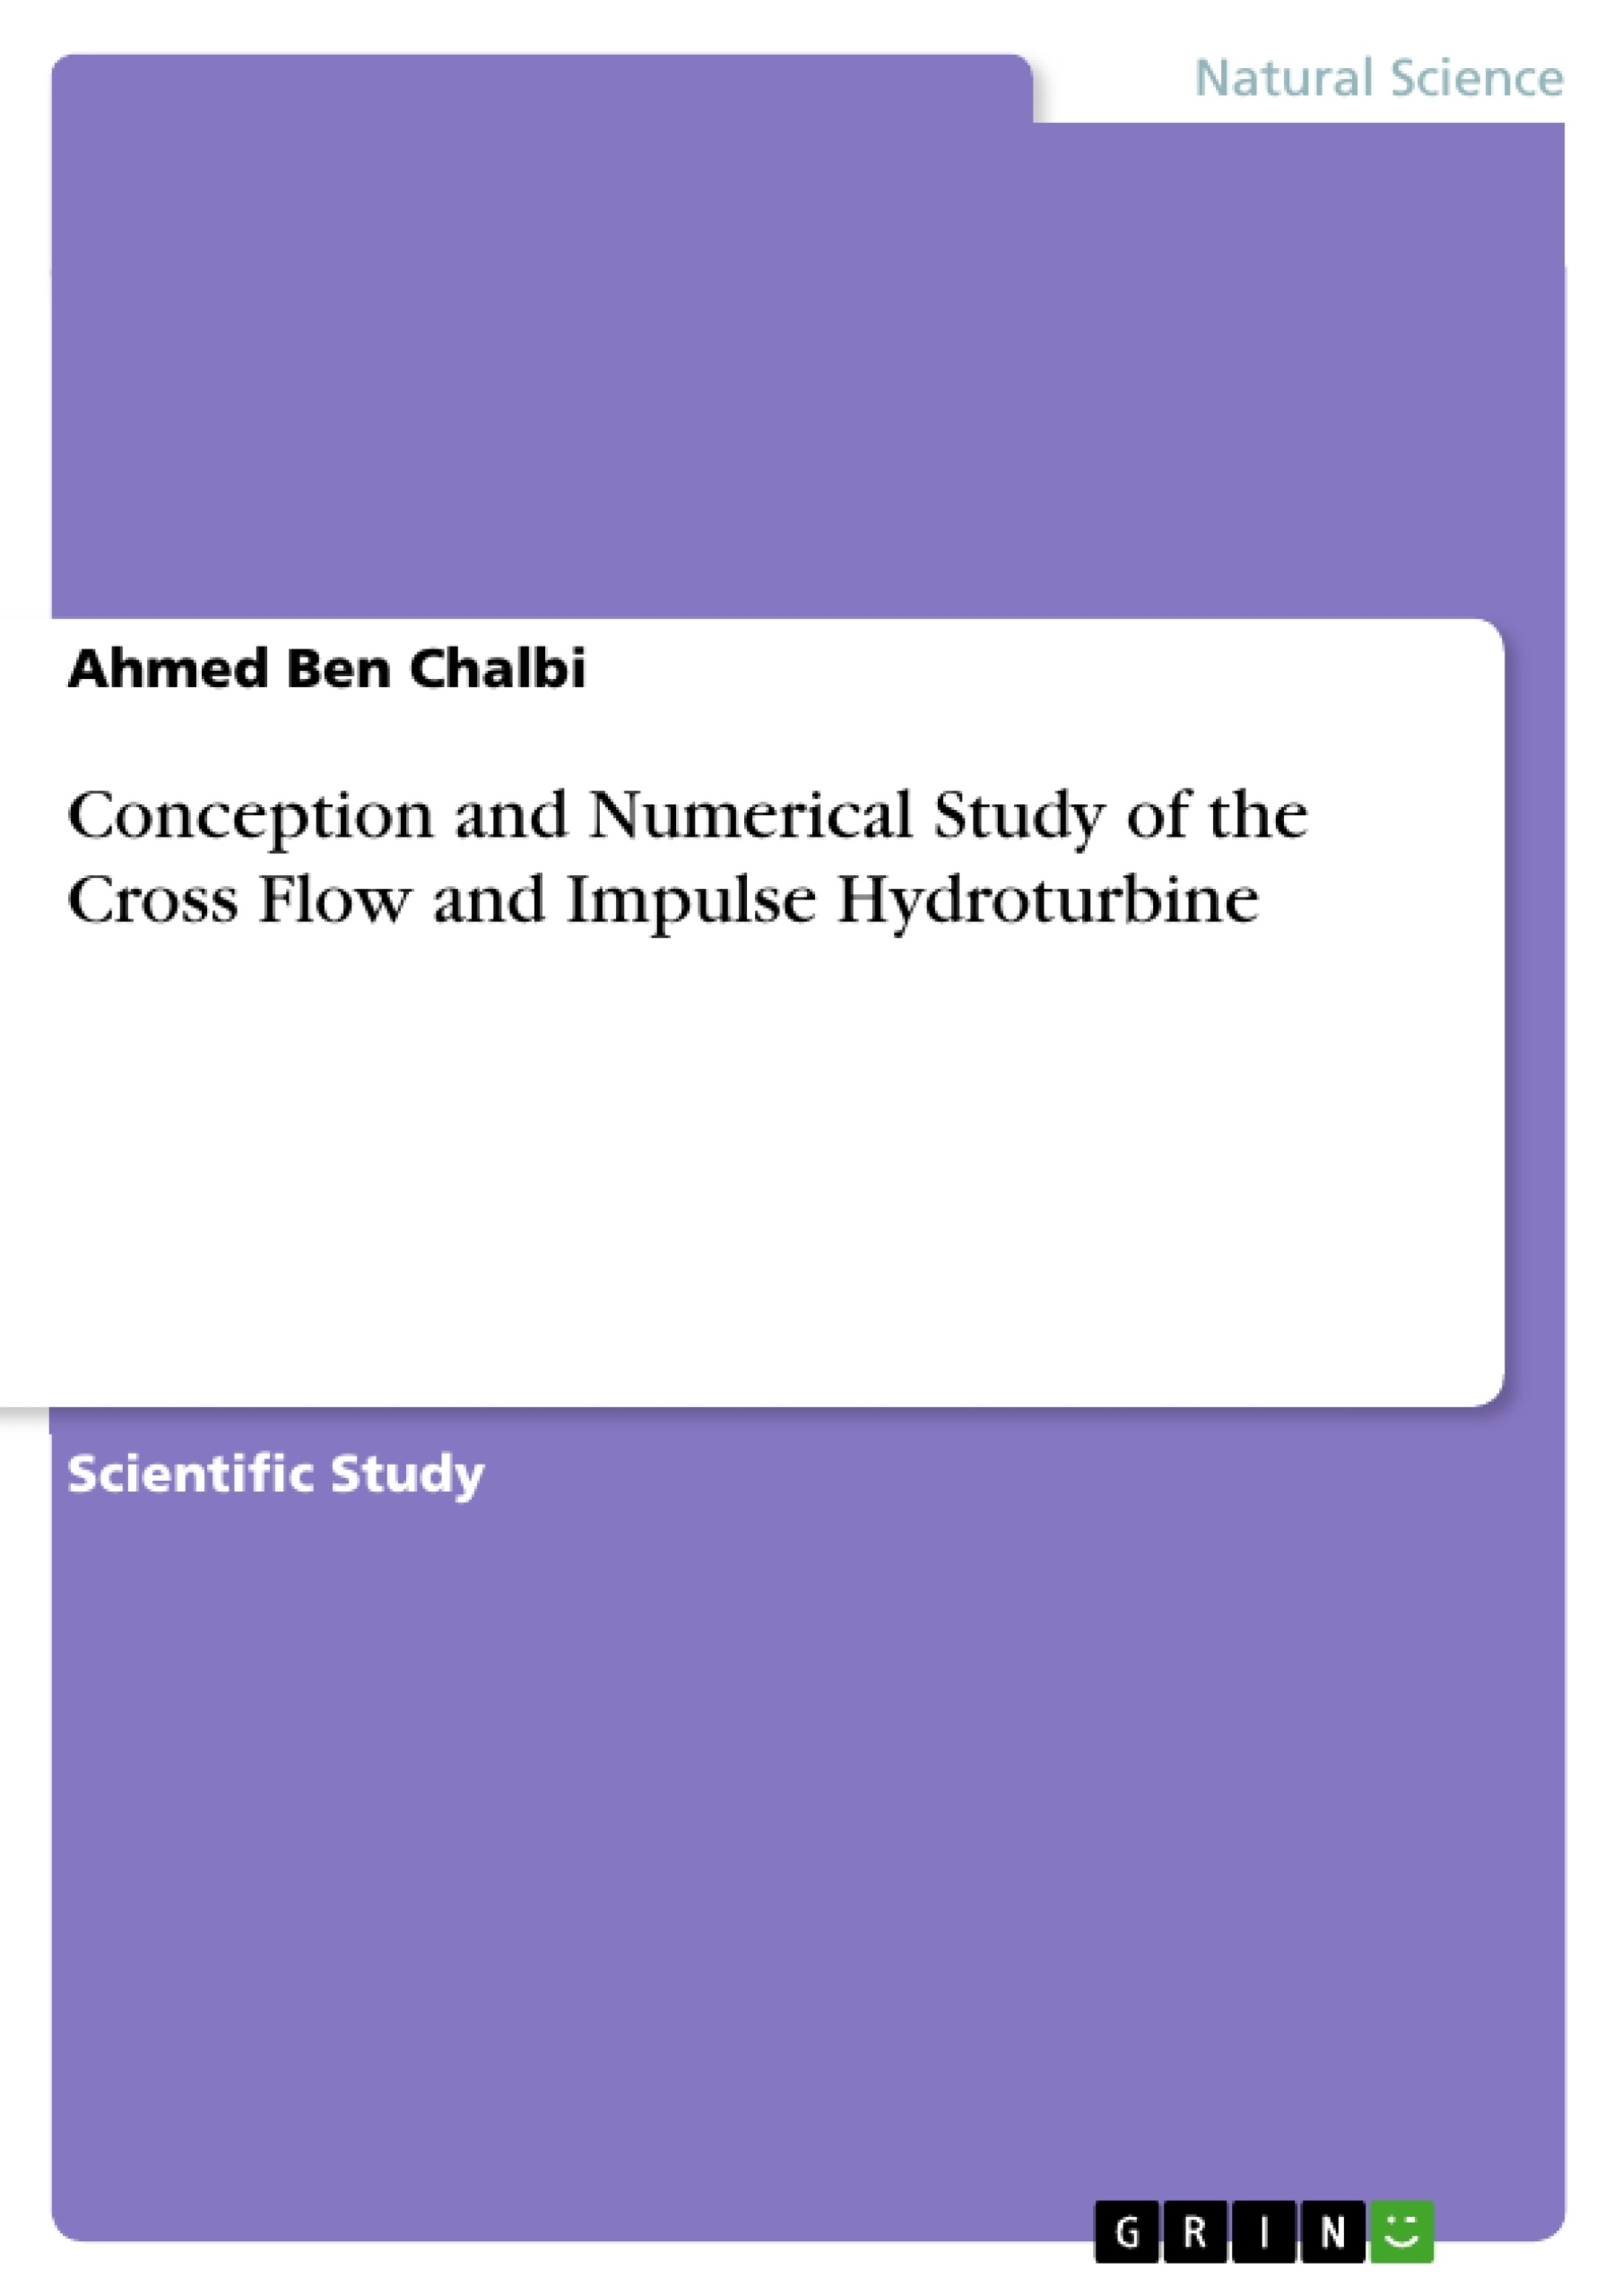 Title: Conception and Numerical Study of the Cross Flow and Impulse Hydroturbine